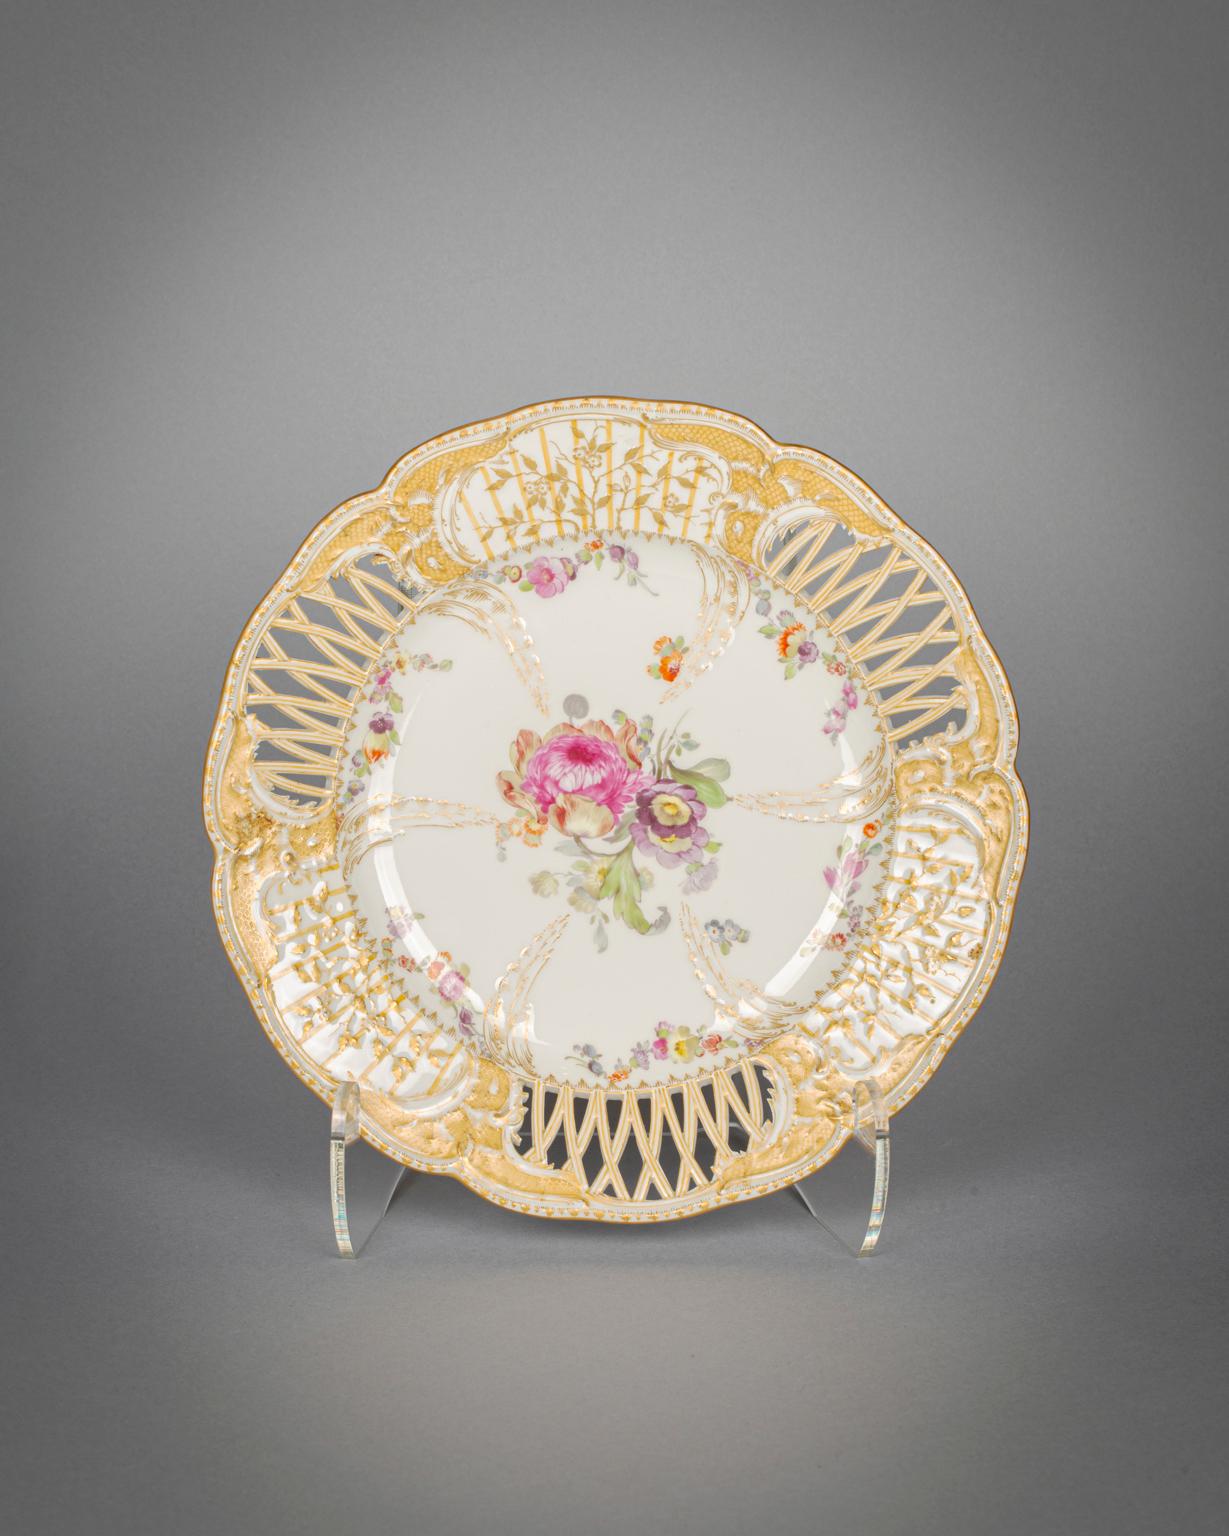 The well finely painted with a central floral bouquet and with six molded gilded leaves radiating outwards alternating with smaller flowers, the three open work border panels alternating with molded gilded leaves. 